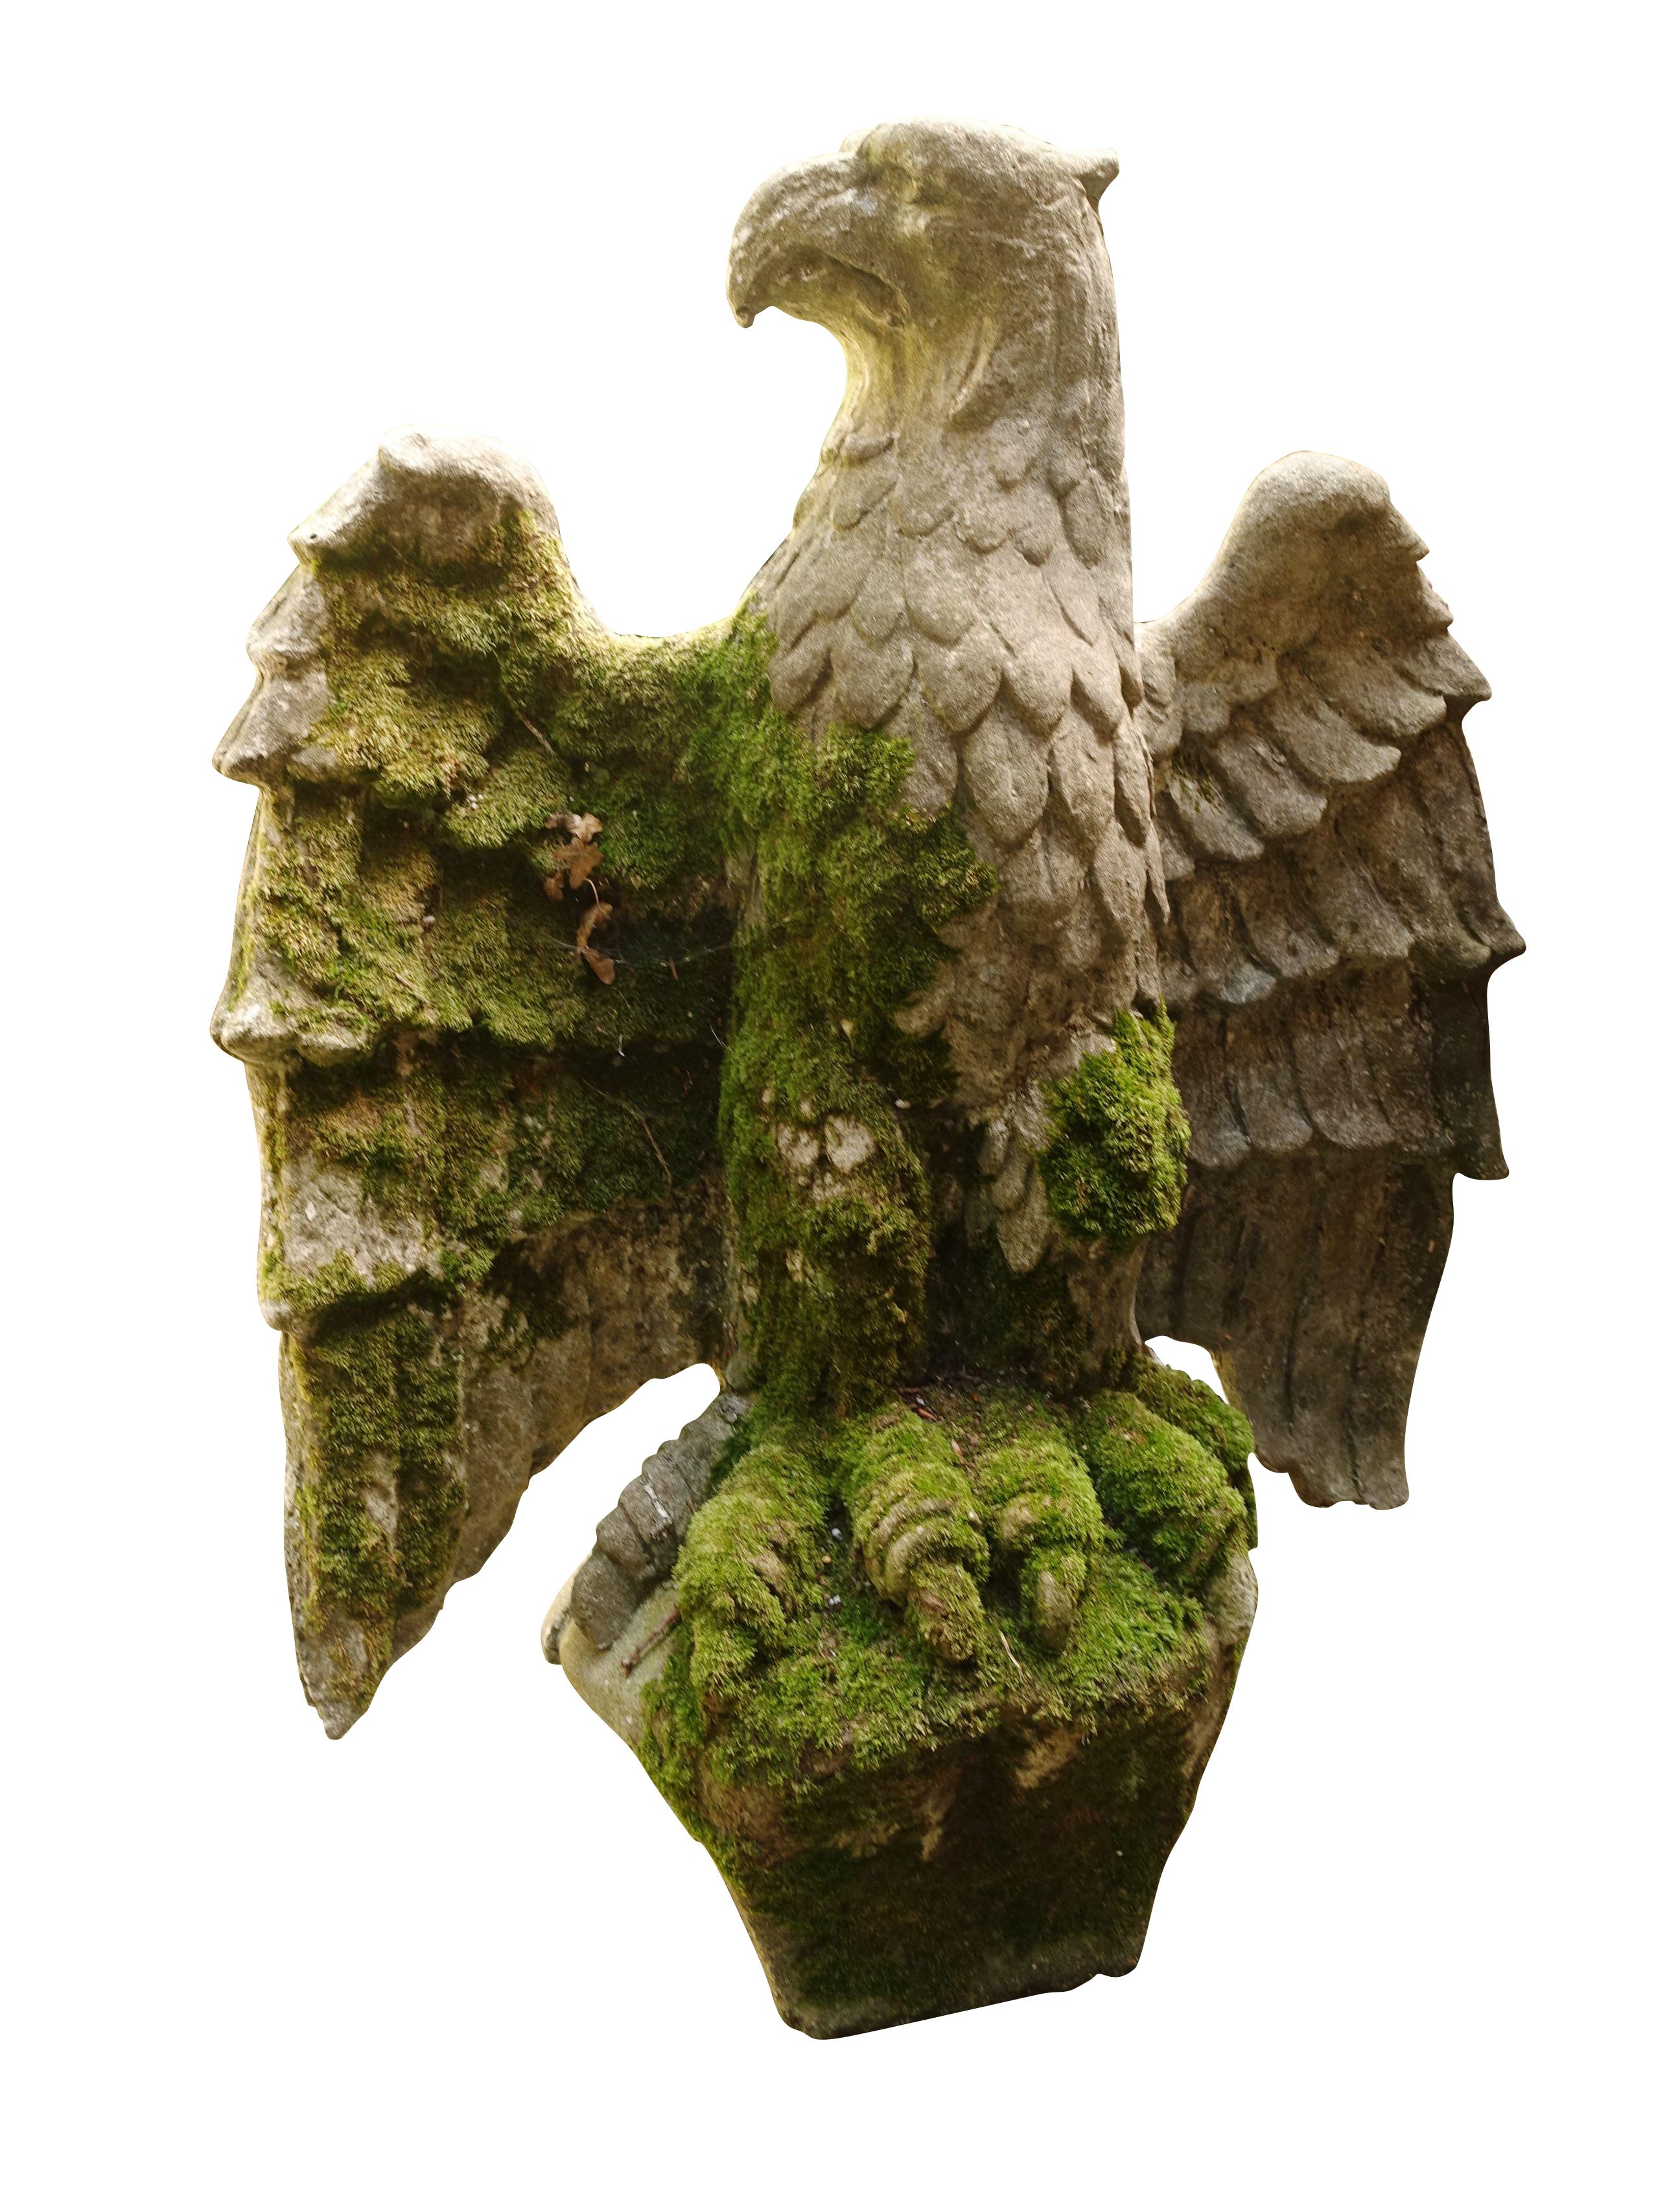 English pair of weathered reconstituted stone eagles, circa 1820
Arriving December